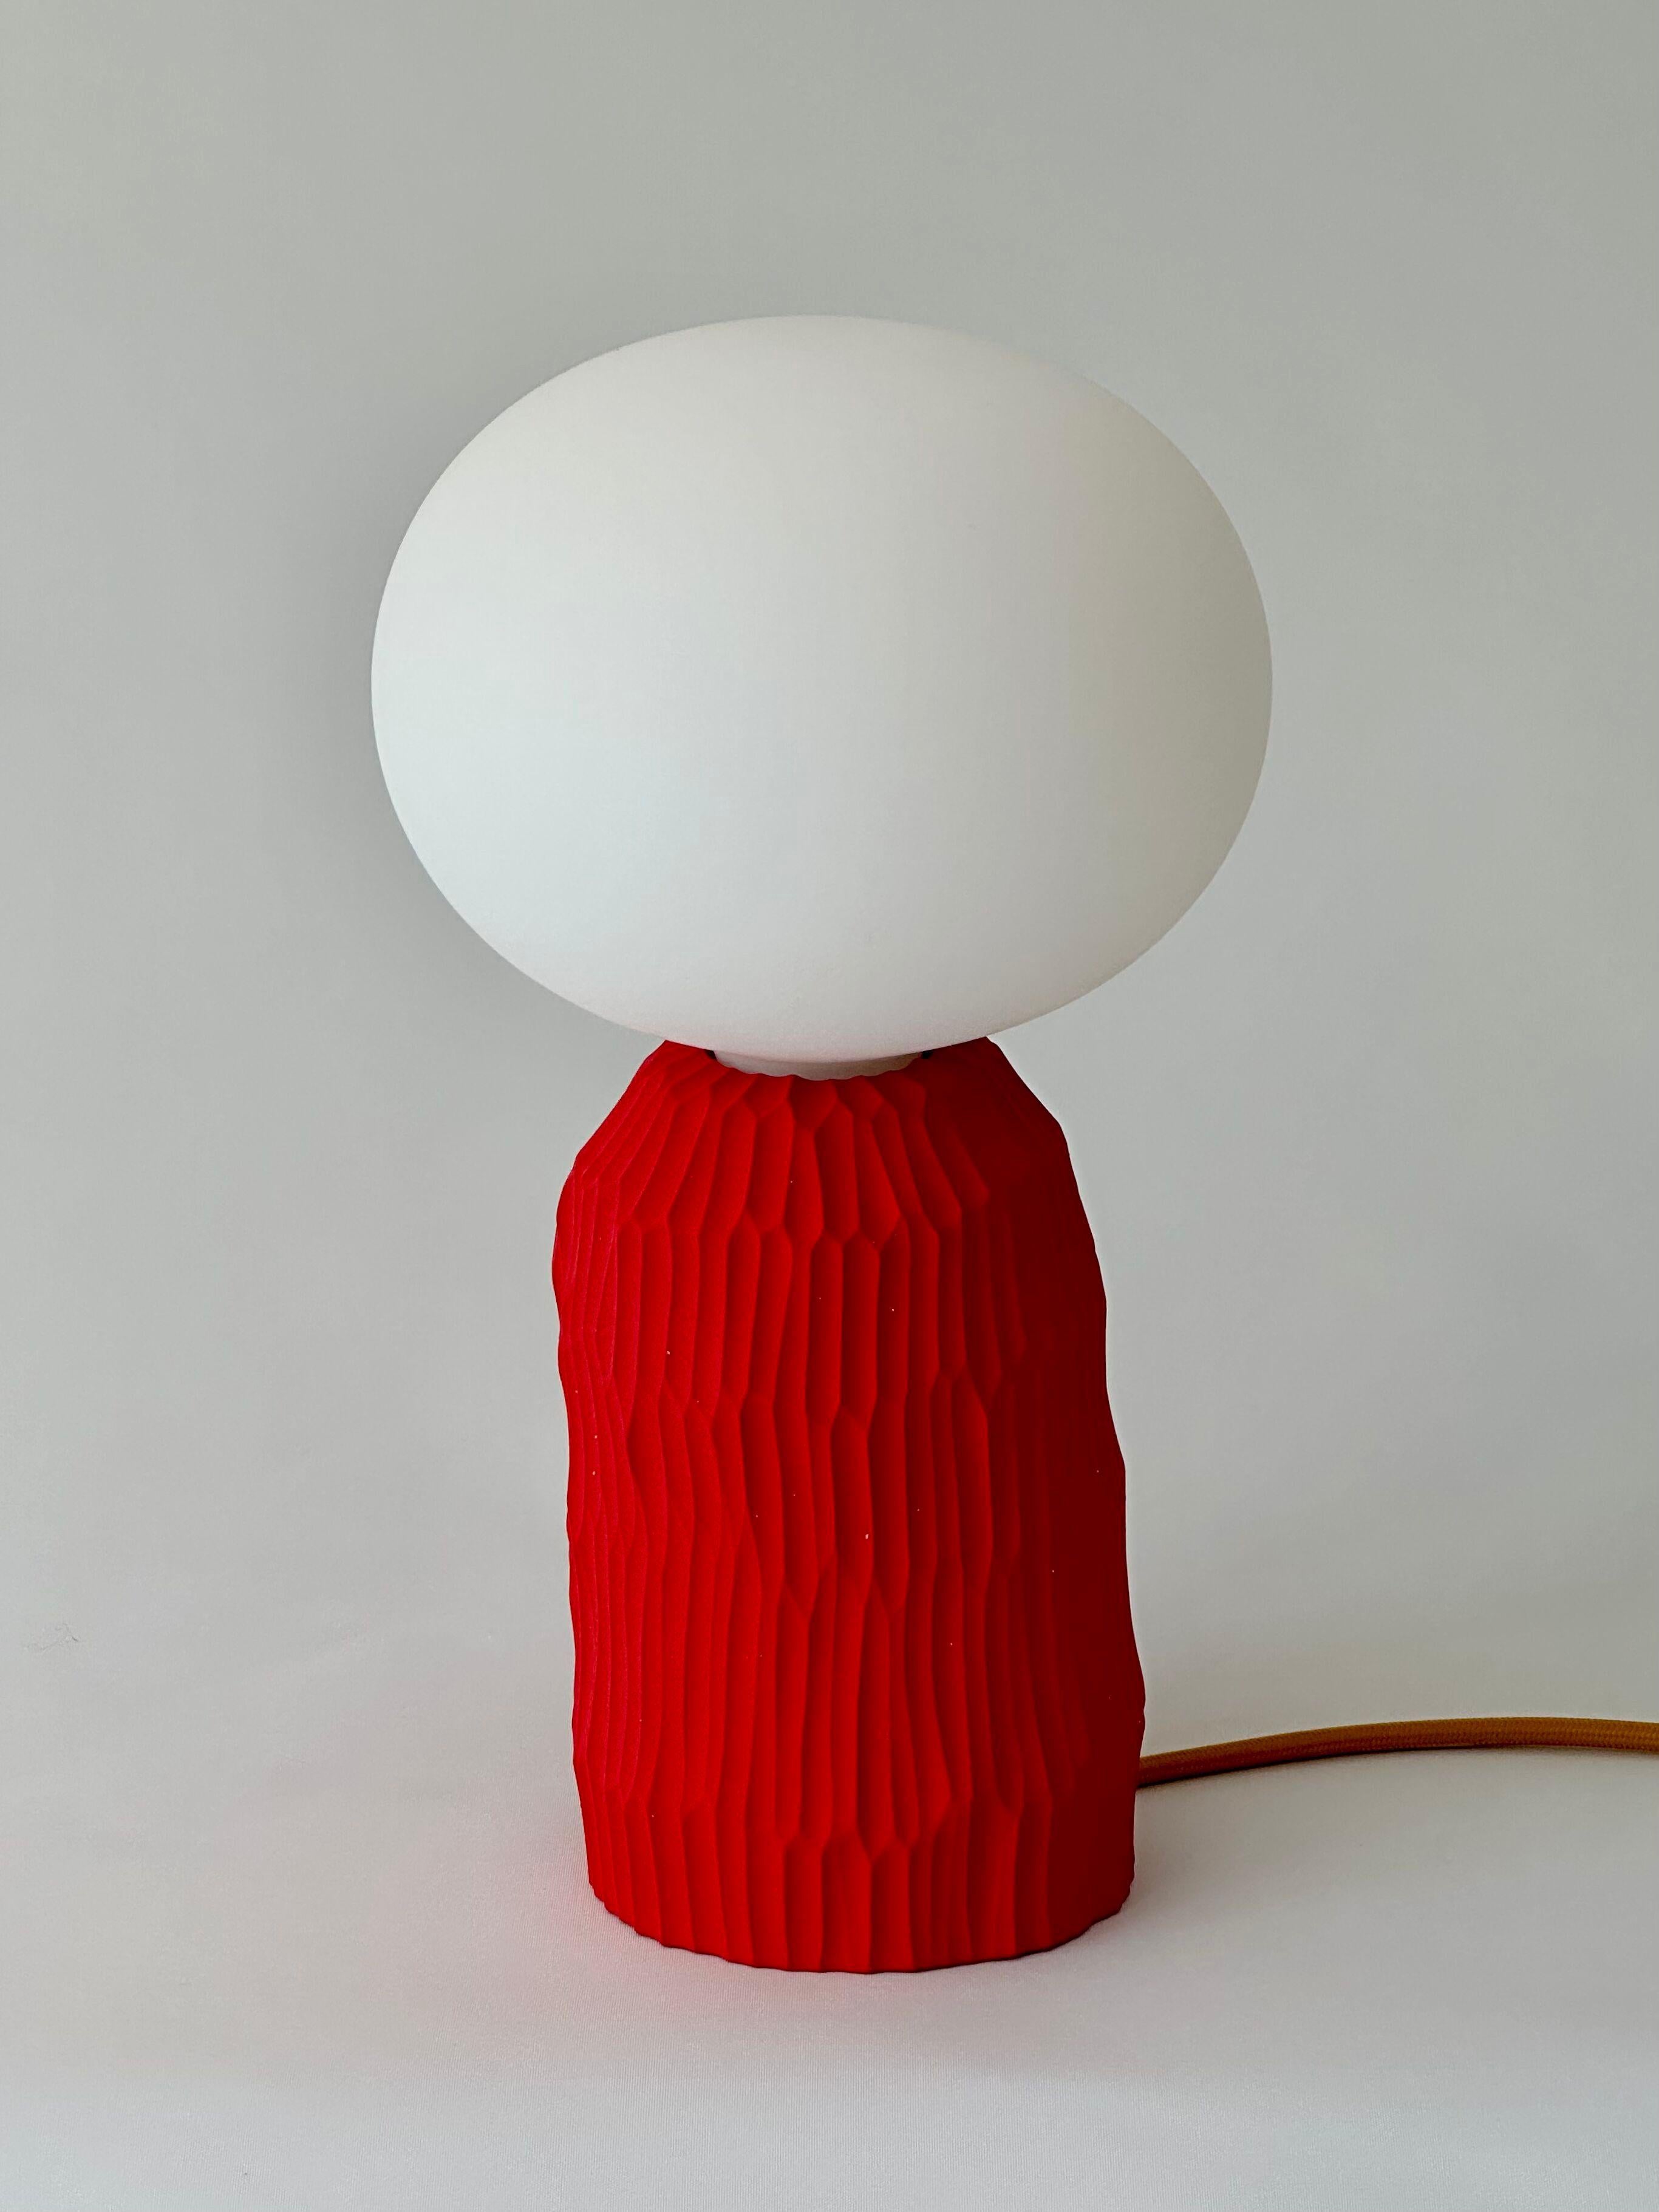 The lamp is a simple and minimalist hand formed ceramic table lamp without a lampshade. Its unique textural base is hand carved in a signature design, with a distinct natural grain from its clay origins. It has been designed to create a unique